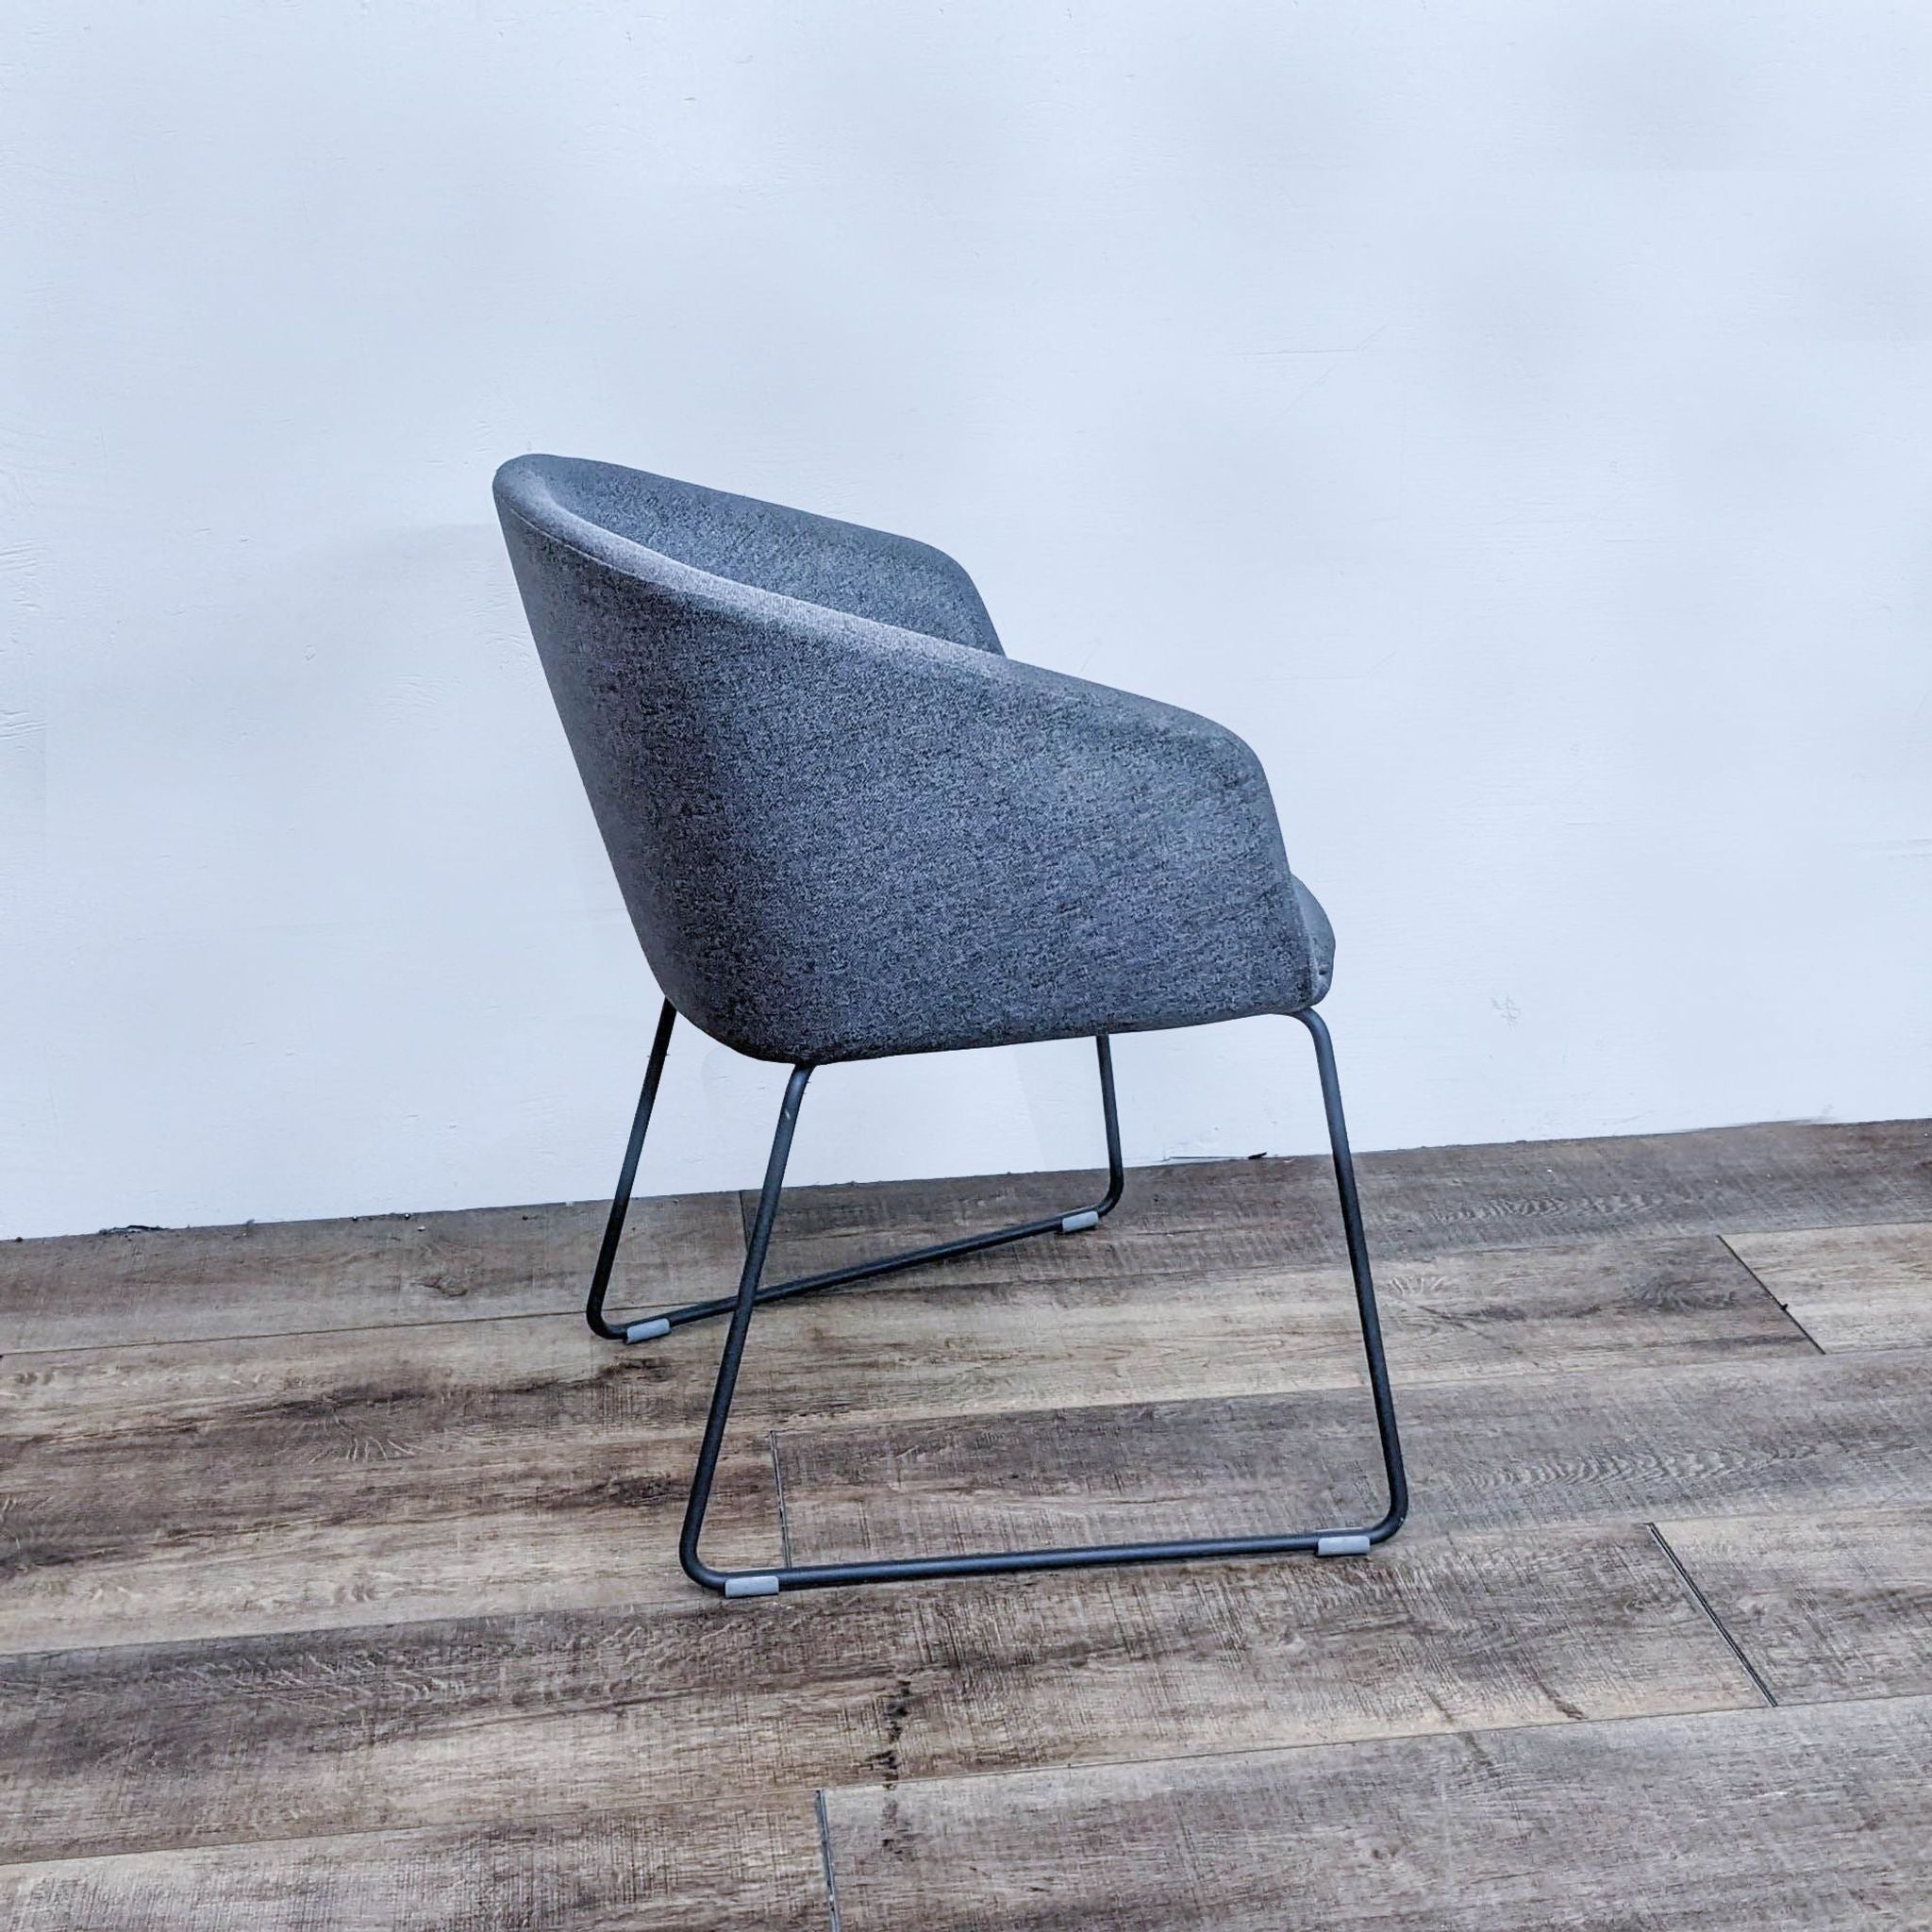 2. Side angle of the Poppin lounge chair displaying the curve of the upholstered backrest and the sturdy metal frame.